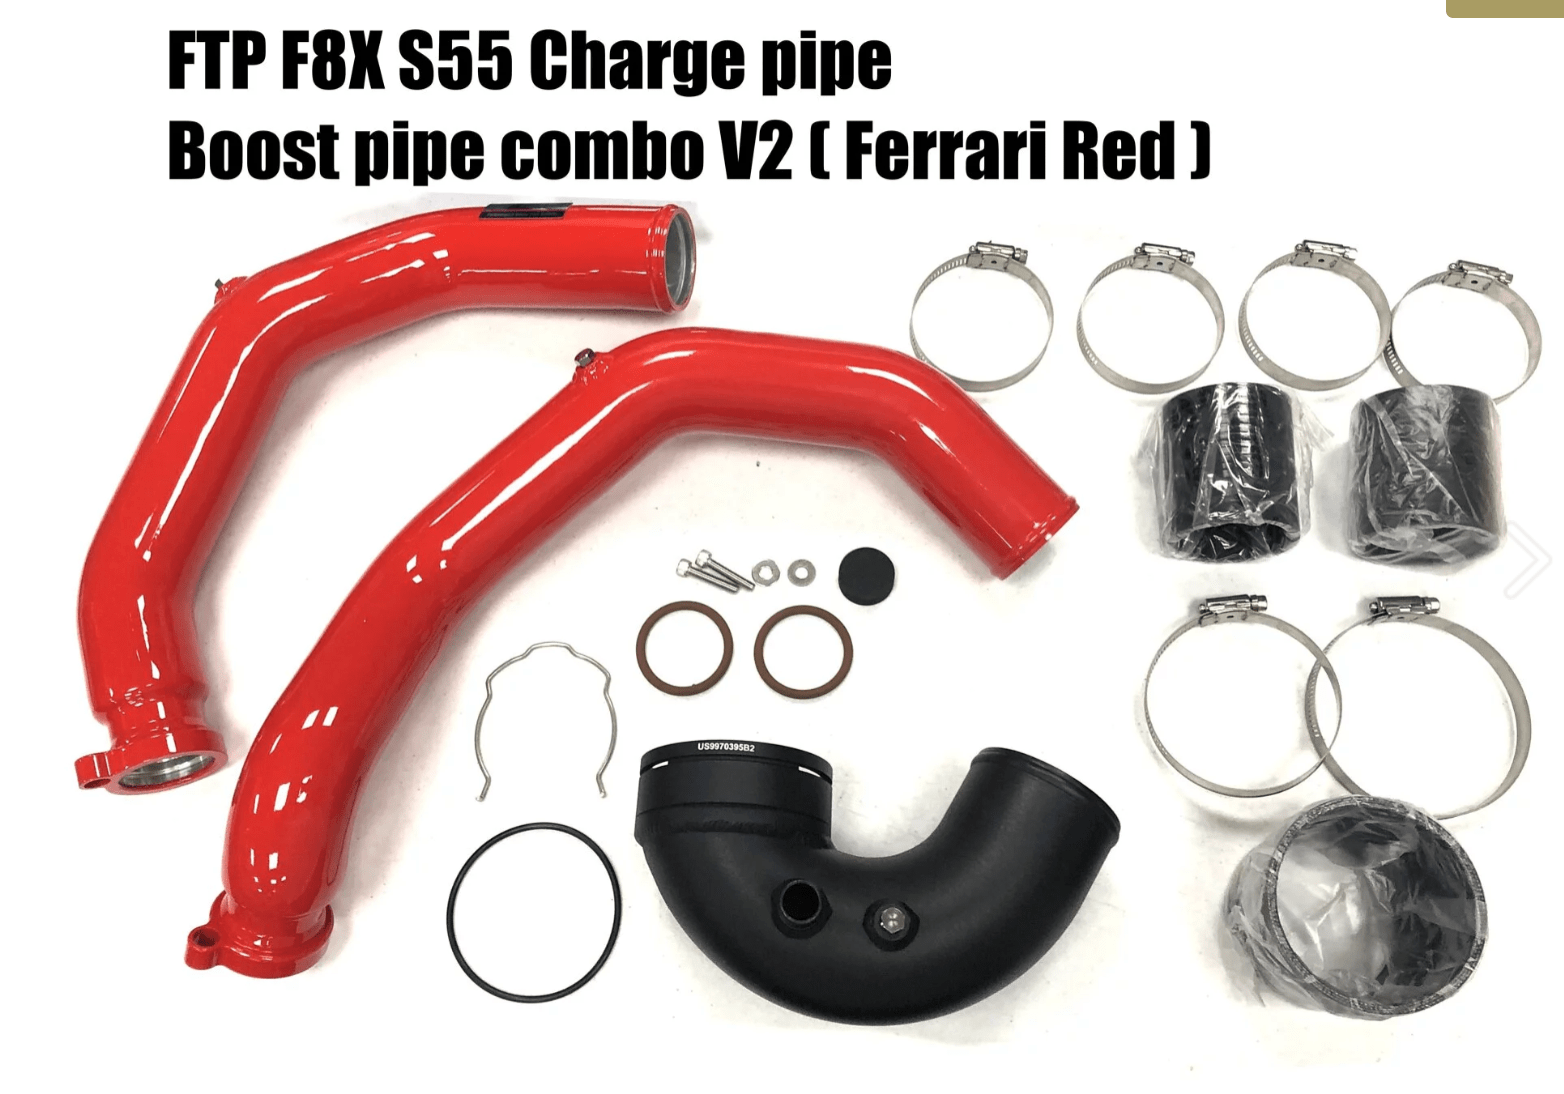 Kies-Motorsports FTP Motorsport FTP BMW S55 Charge pipe+Boost pipe combo V2 for F80 M3/F82 M4 Ferrari Red